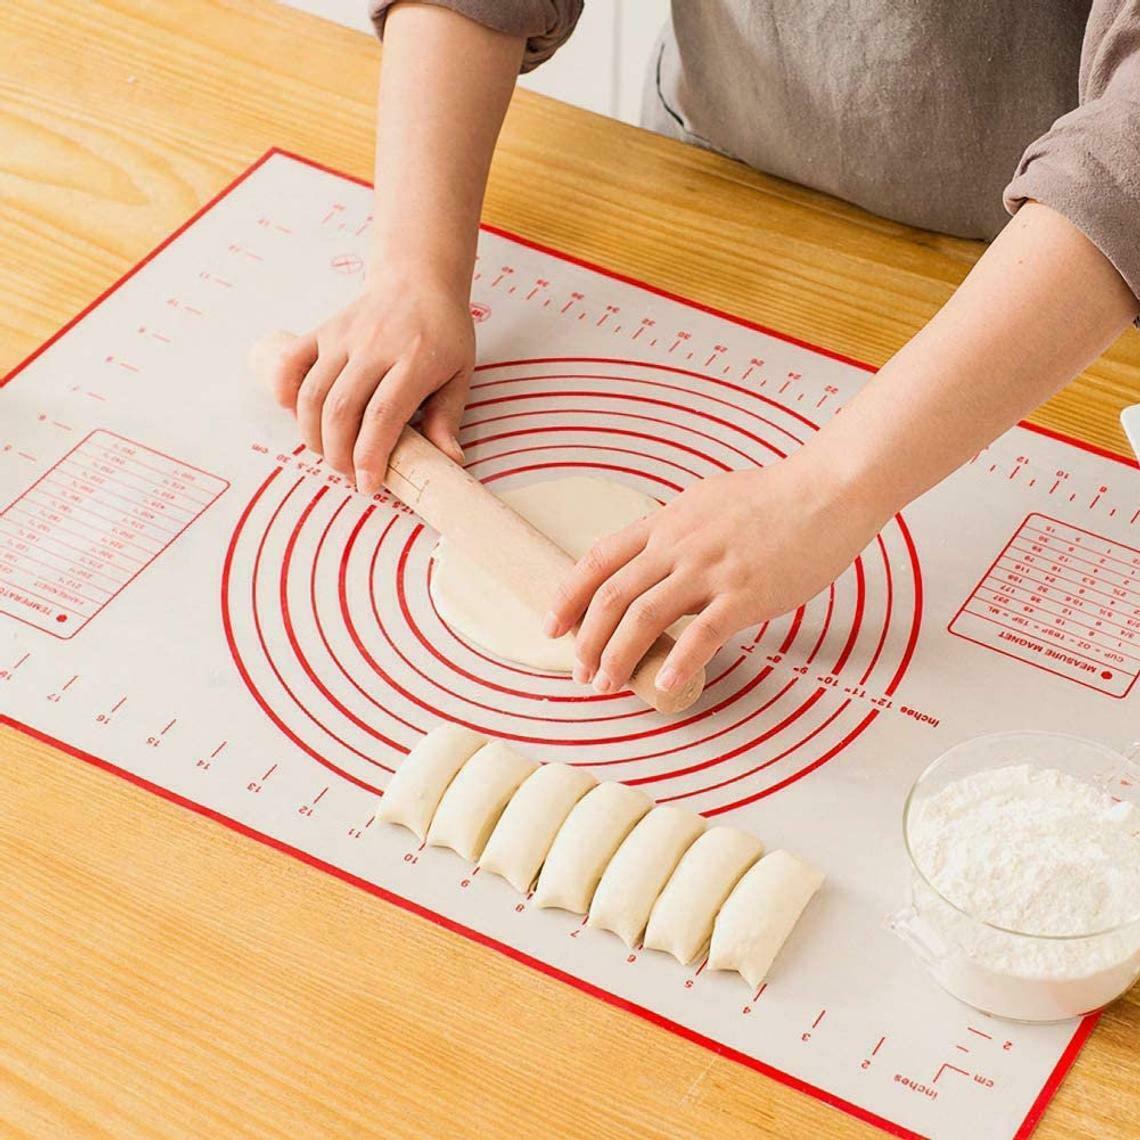 Extra Large 20 x 28 Non Stick Silicone Baking Mat with Measurements